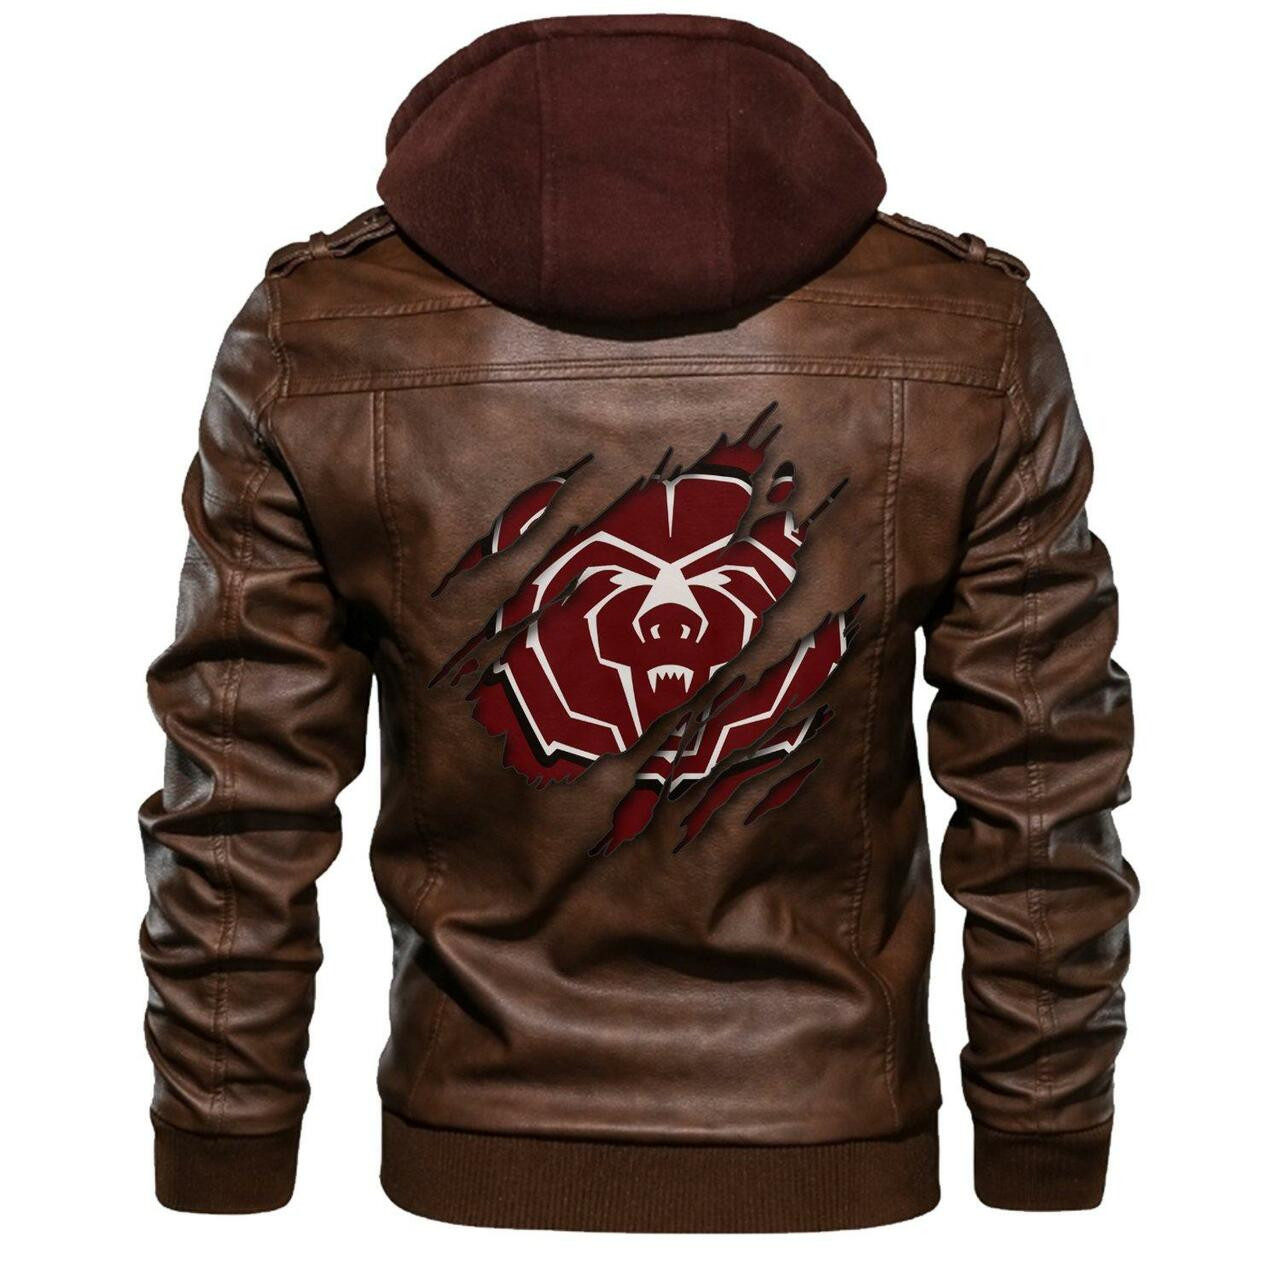 You can find Leather Jacket online at a great price 3